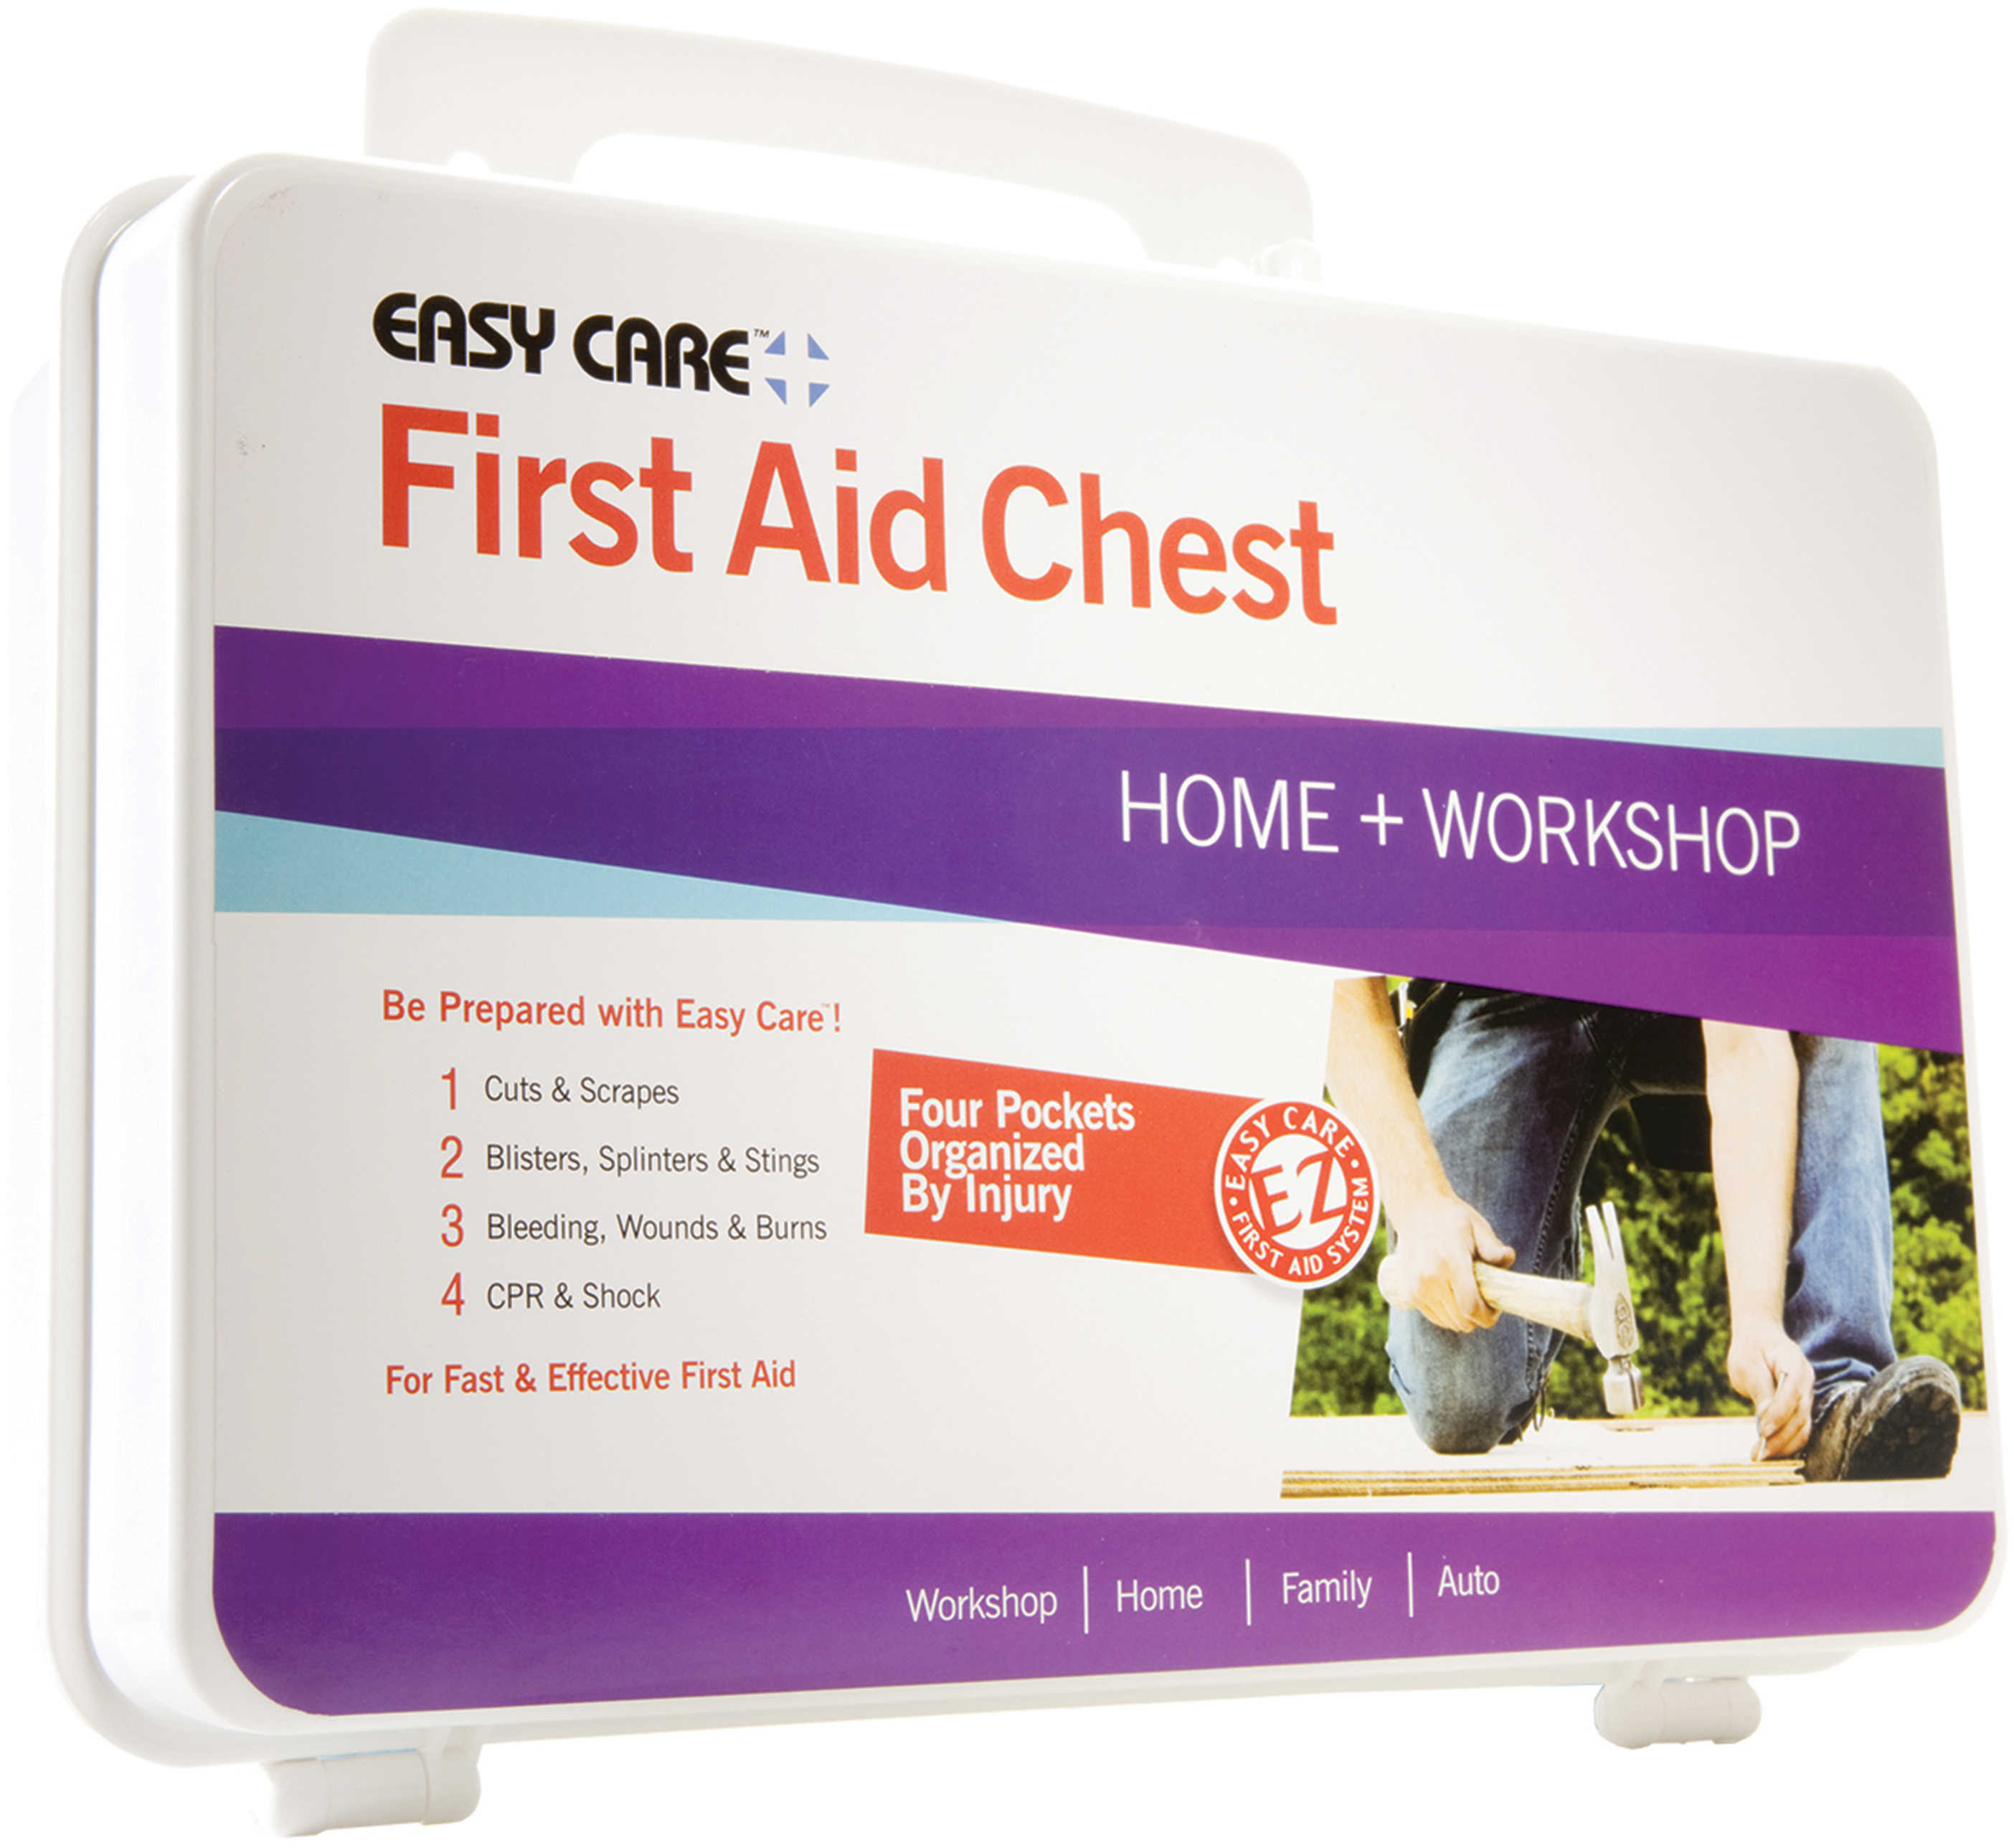 Adventure Medical Kits / Tender Corp AMK Easy Care Home + Workshop First Aid Kit